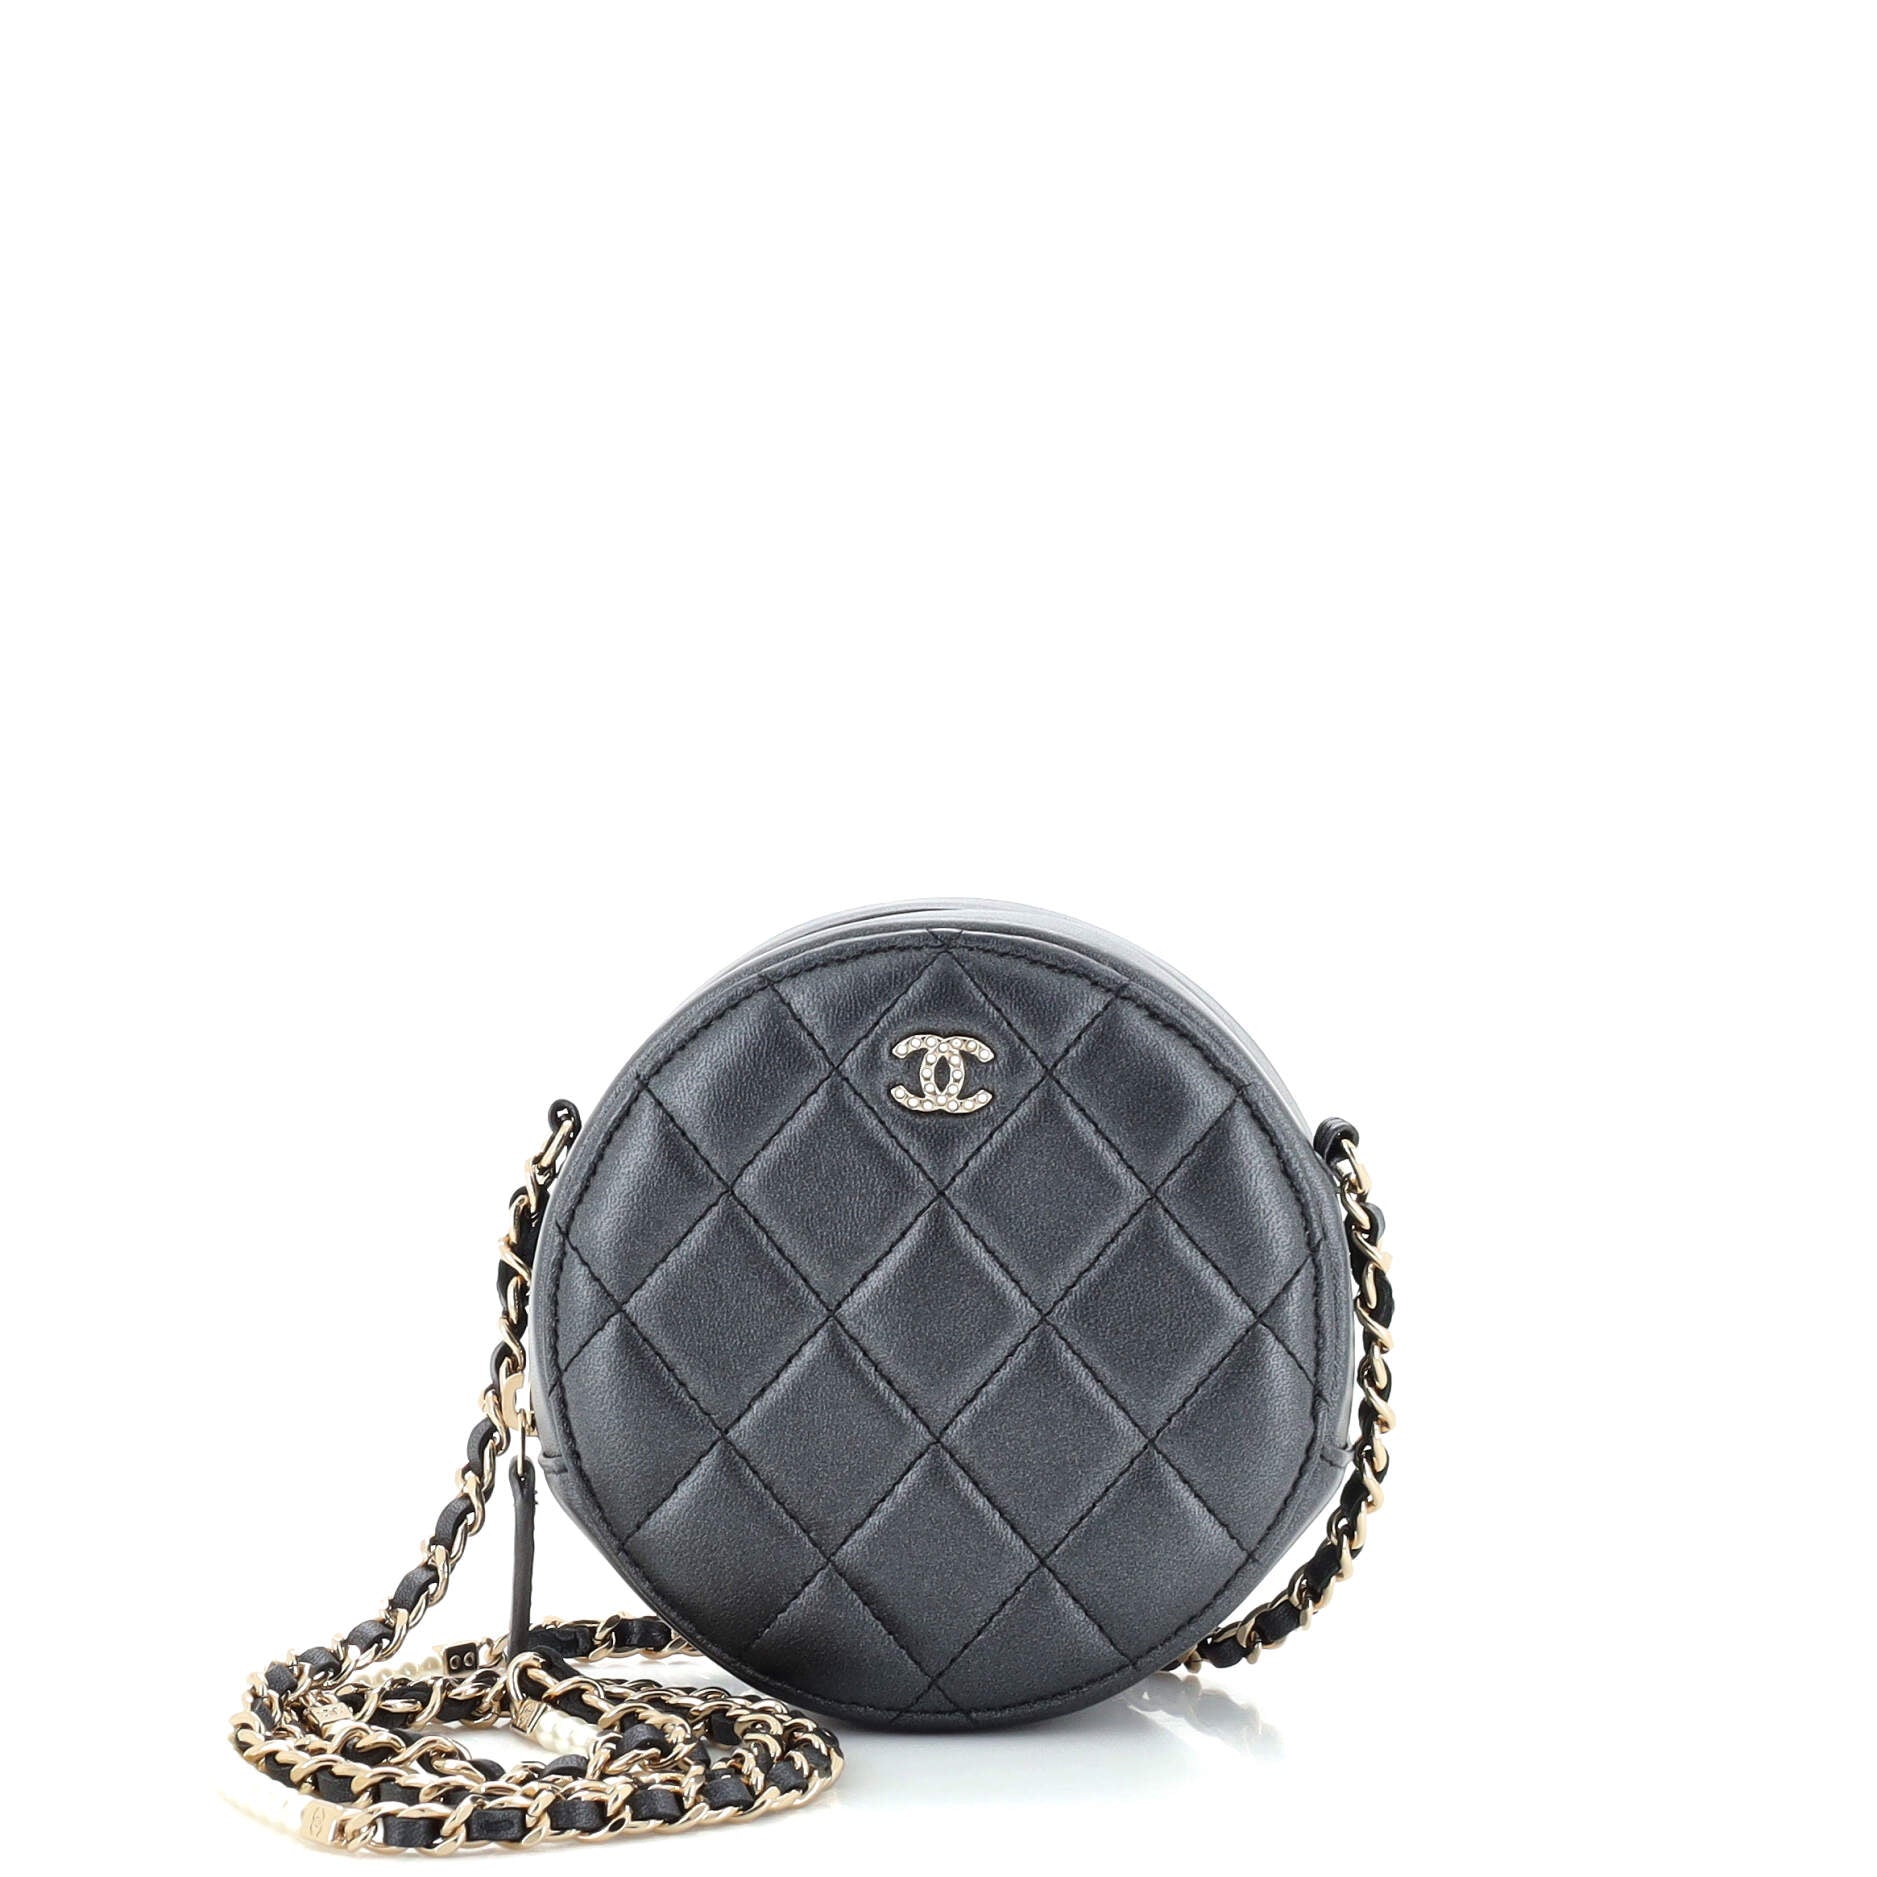 Pearl Strap Round Clutch with Chain Quilted Iridescent Lambskin